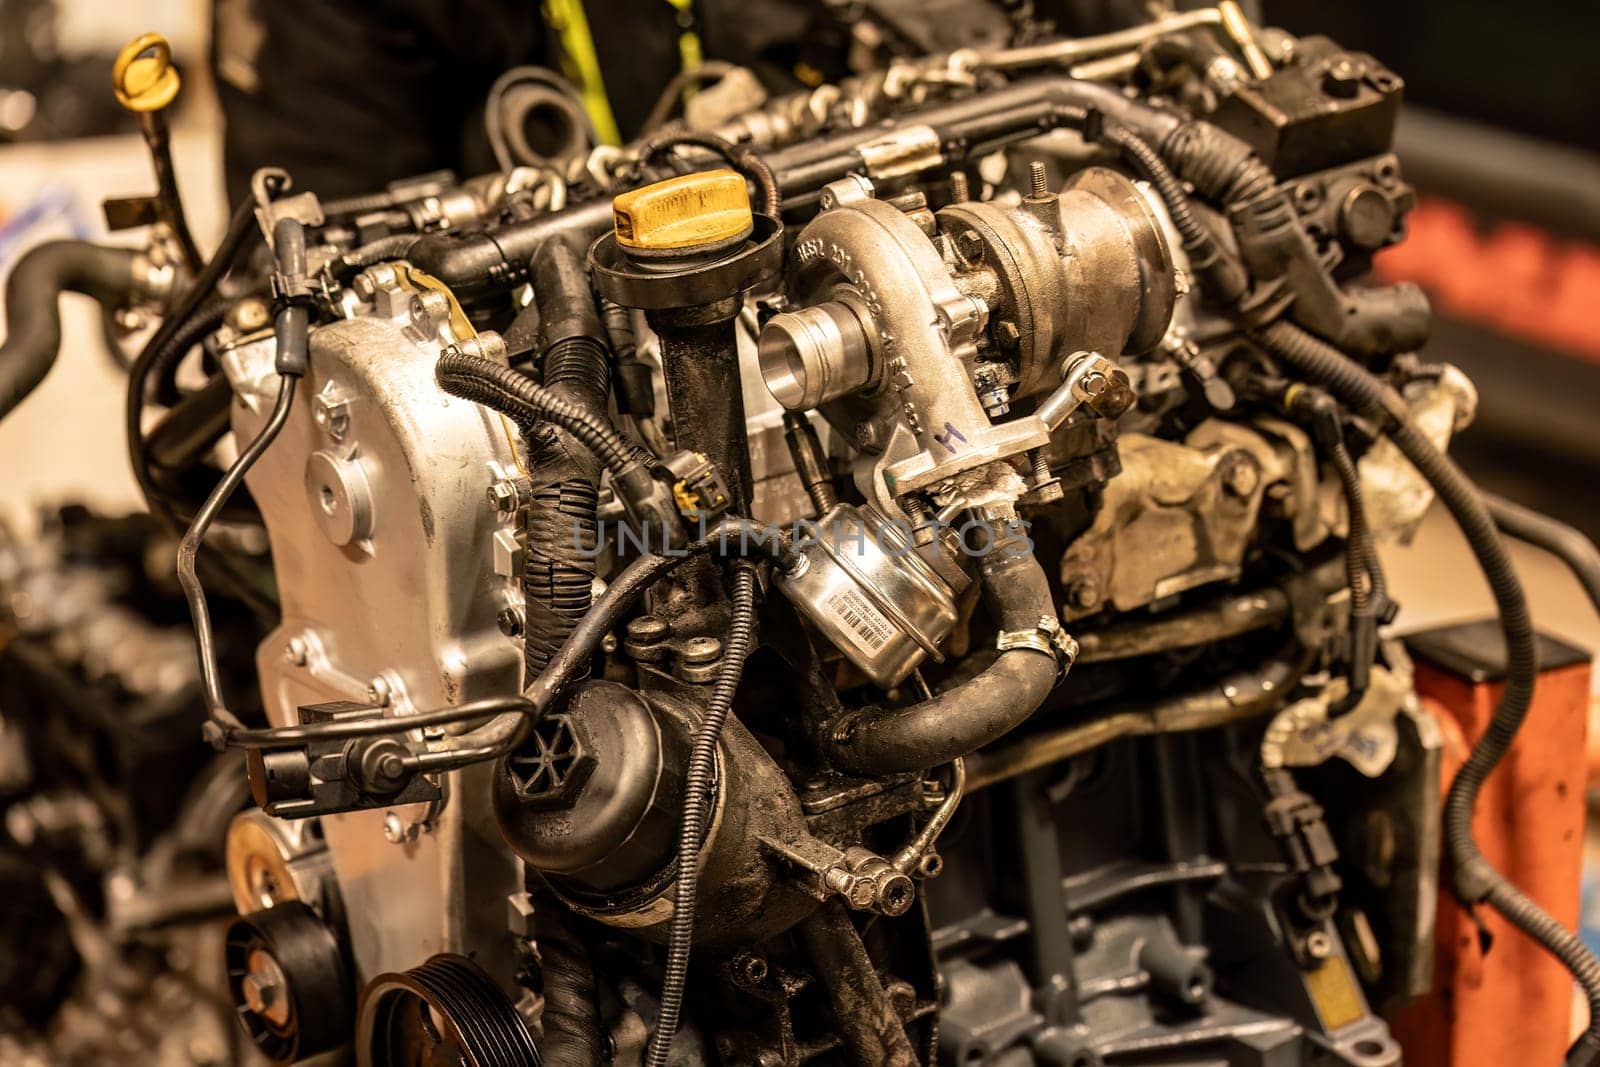 A photo capturing the intricate details of a dismantled car engine, exposing its inner workings.